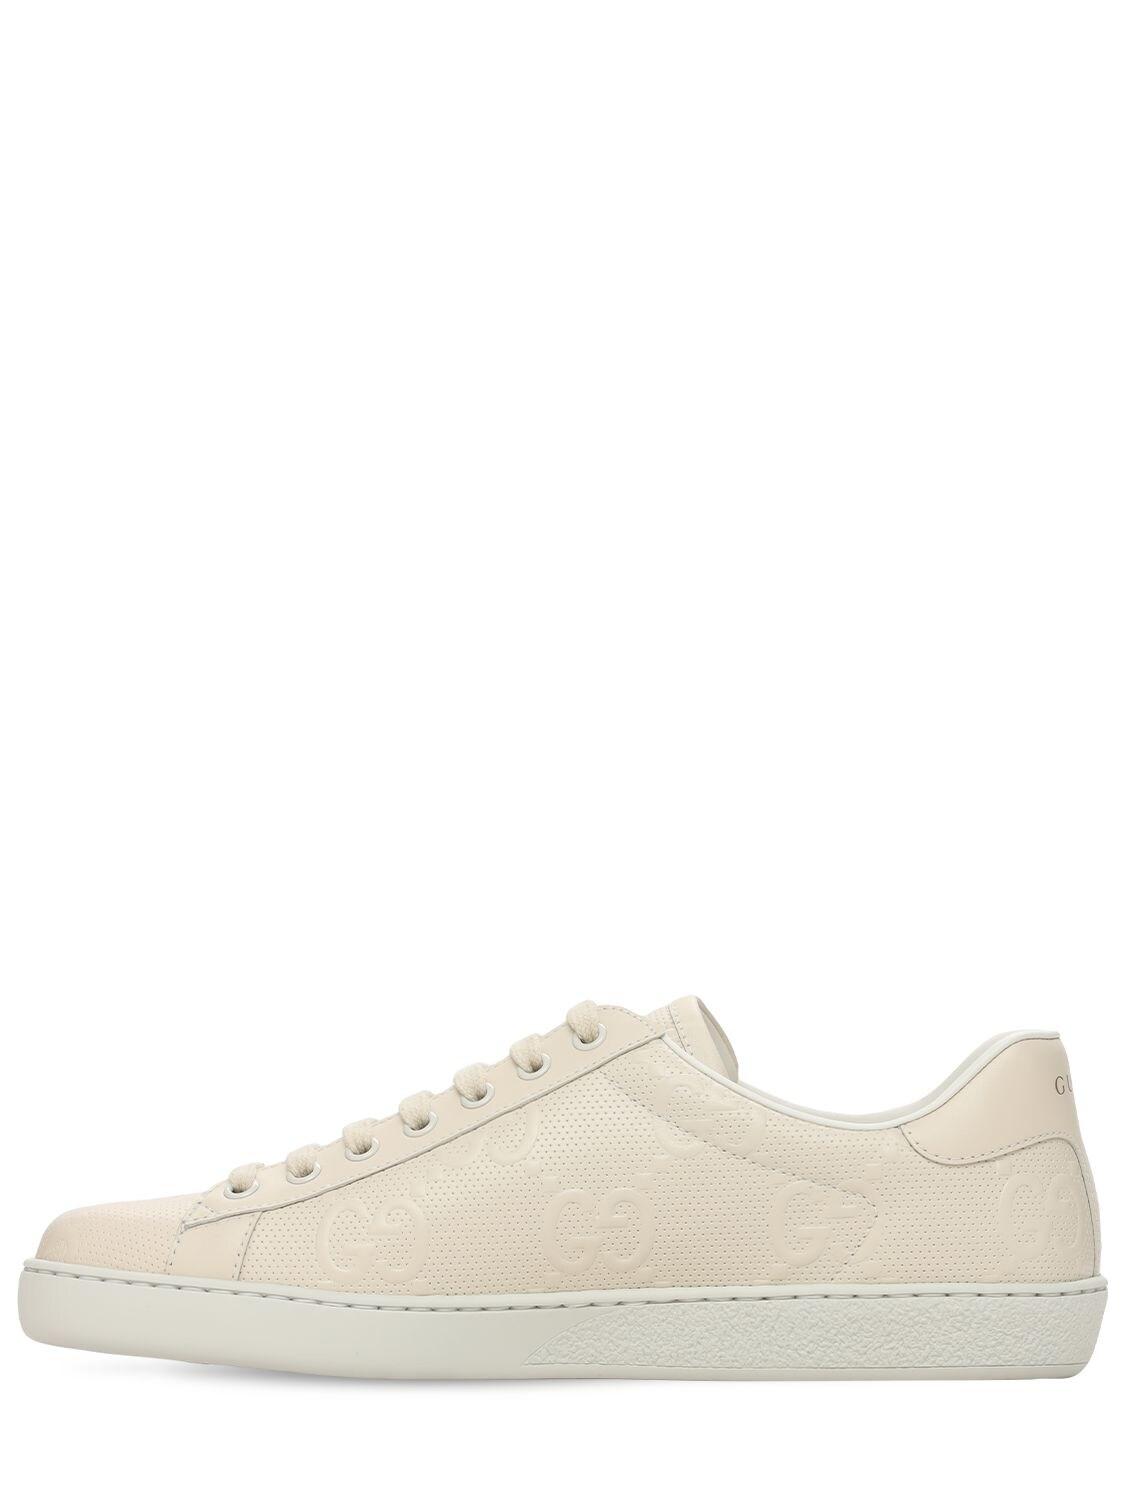 Gucci Ace GG Embossed Sneaker in White for Men | Lyst